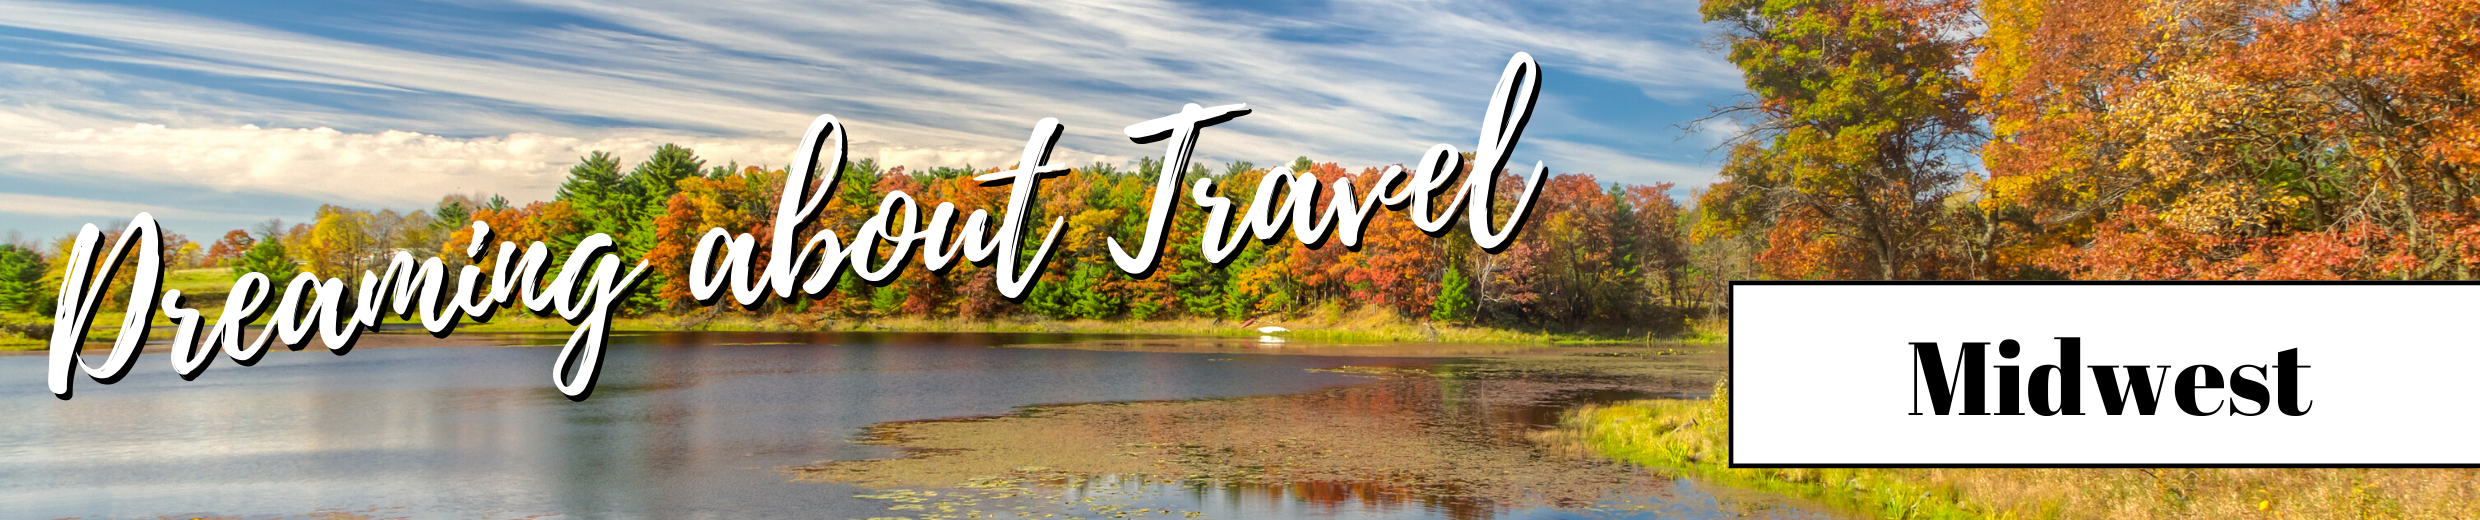 Dreaming About Travel: Midwest